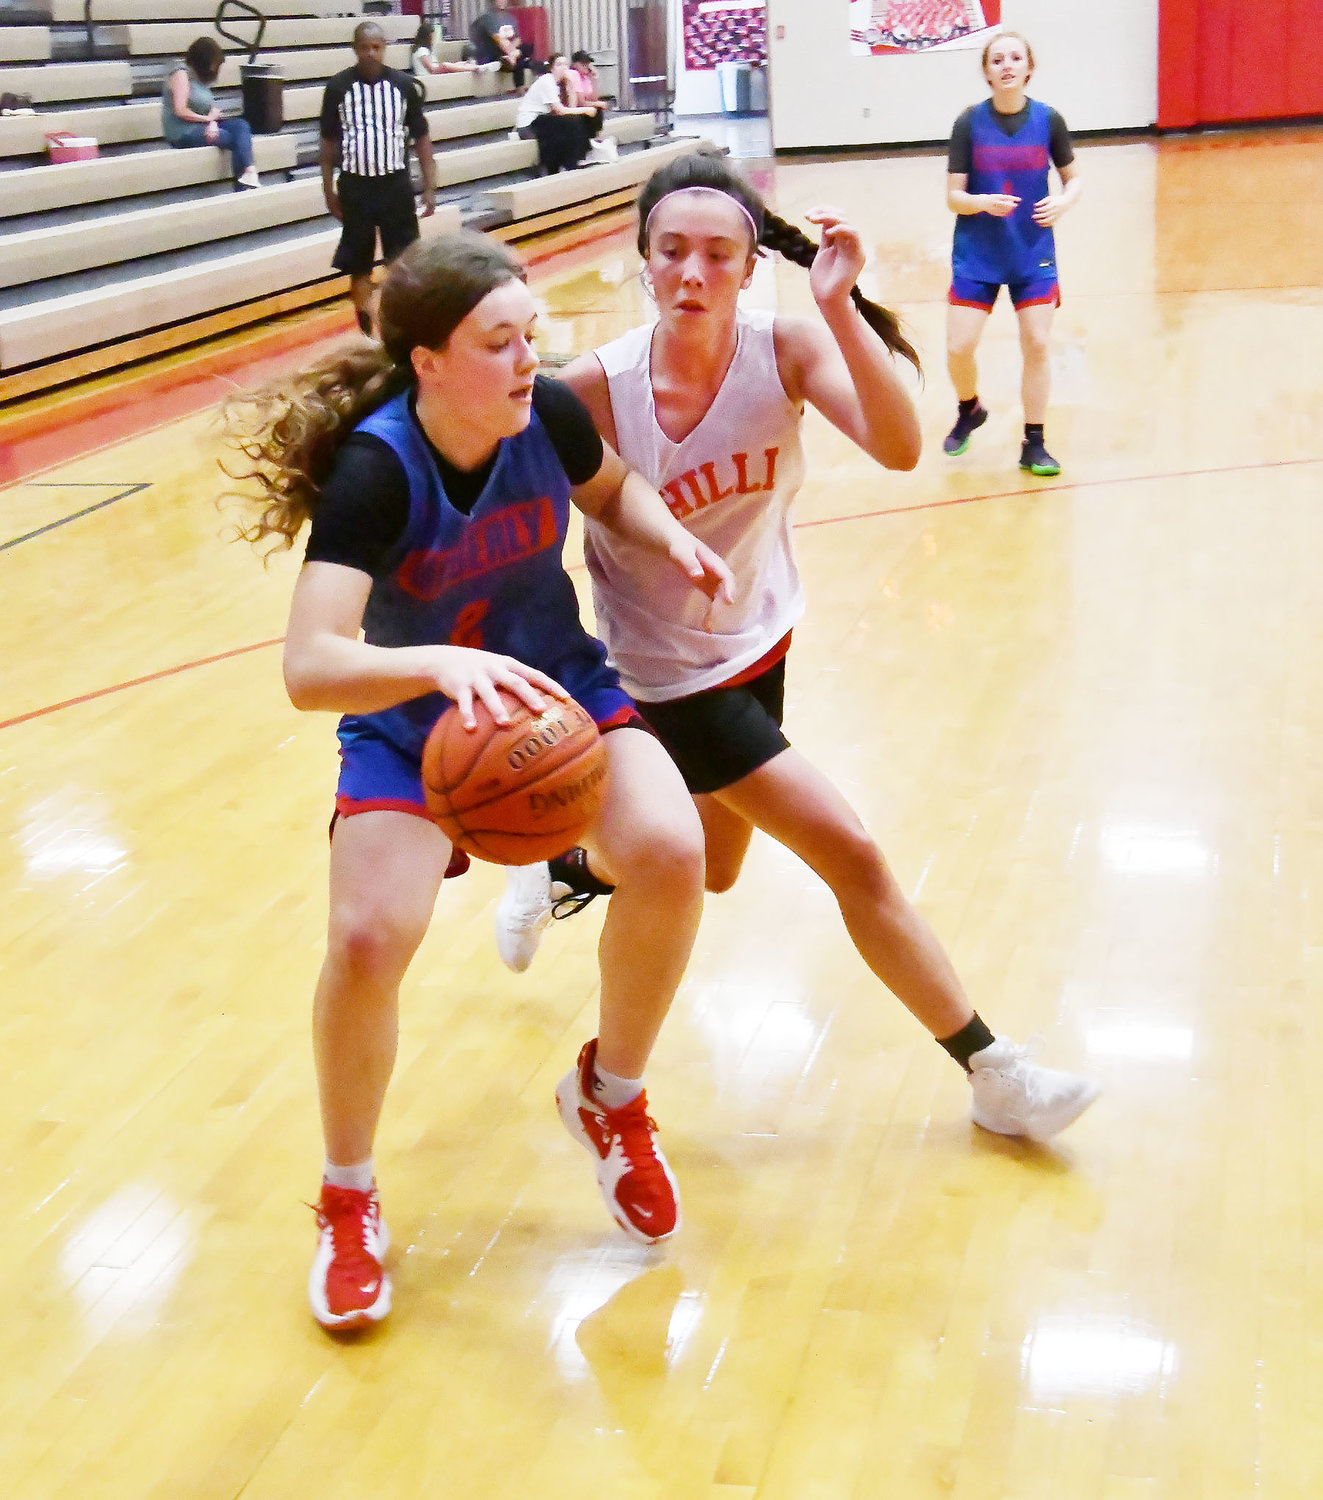 Moberly's Grace Billington, one of the most highly-touted players in north central Missouri, dribbles along the baseline while defended by a player from Chillicothe.